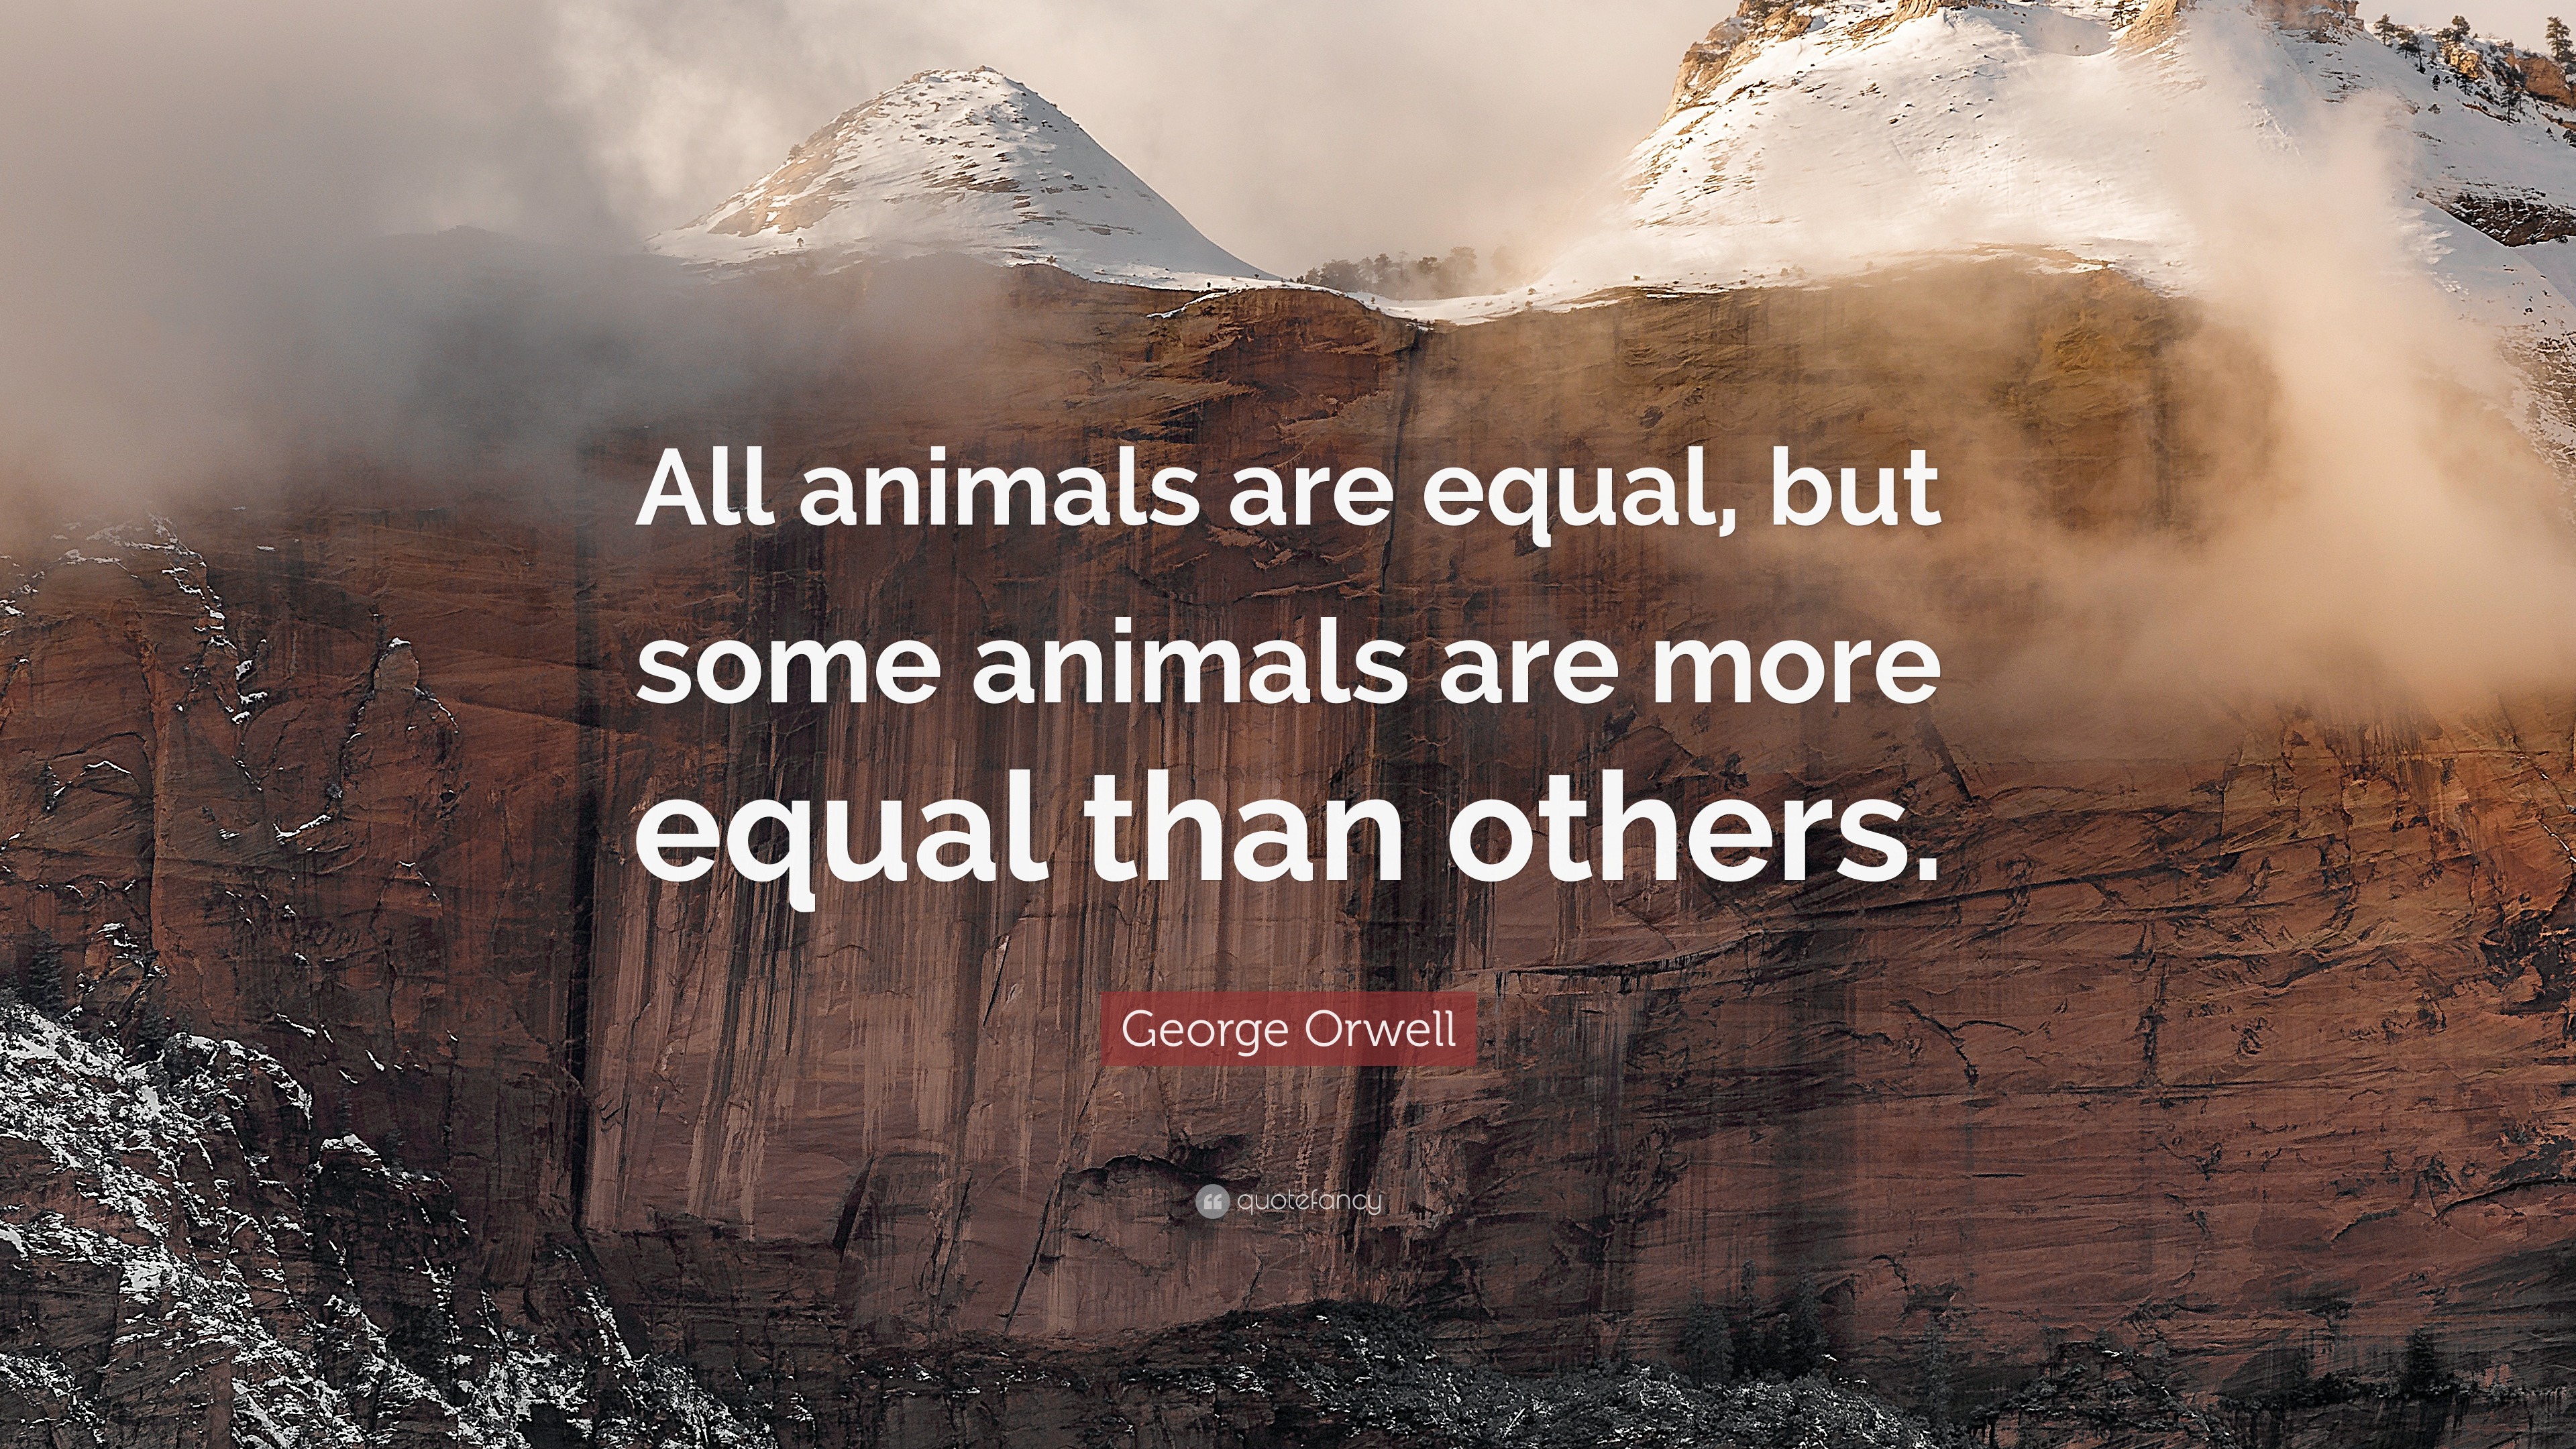 George Orwell Quote: “All animals are equal, but some animals are more